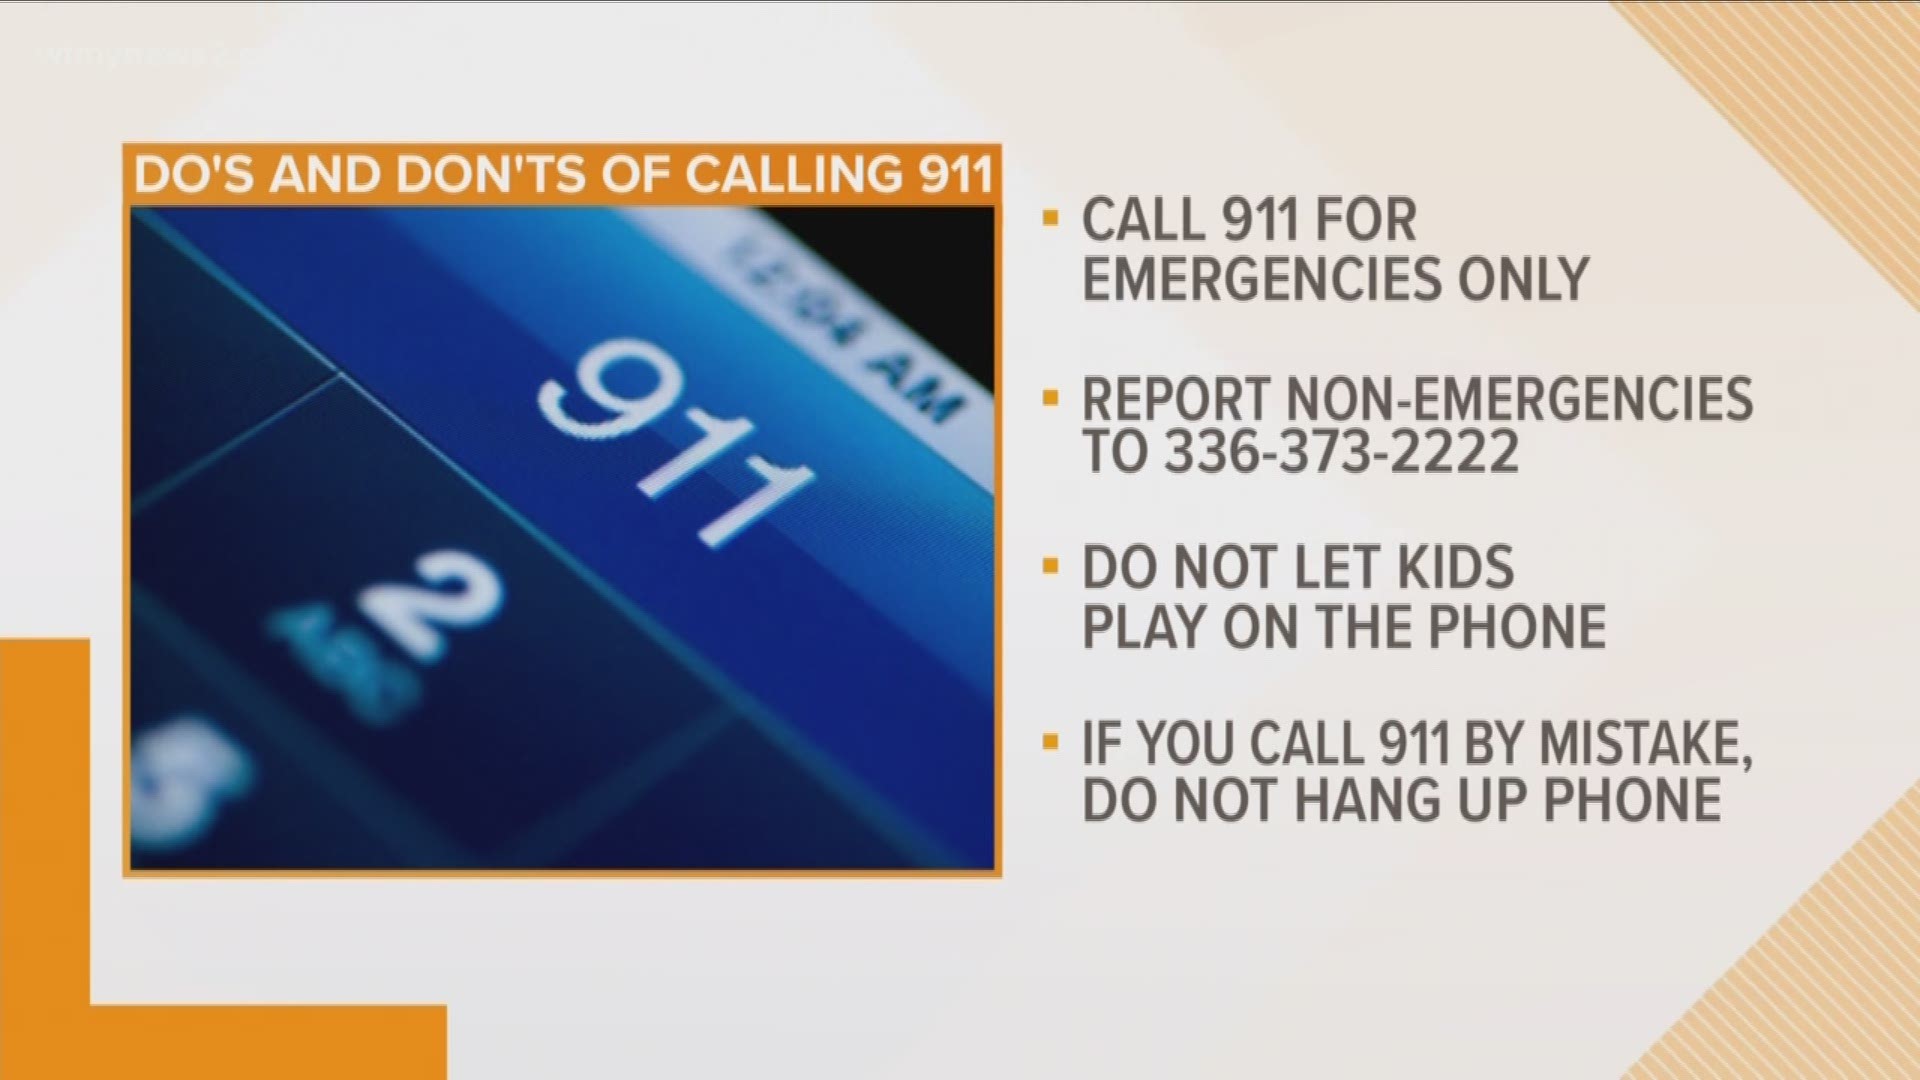 Guilford Metro 911 Reminds The Public To Only Call 911 For Emergencies